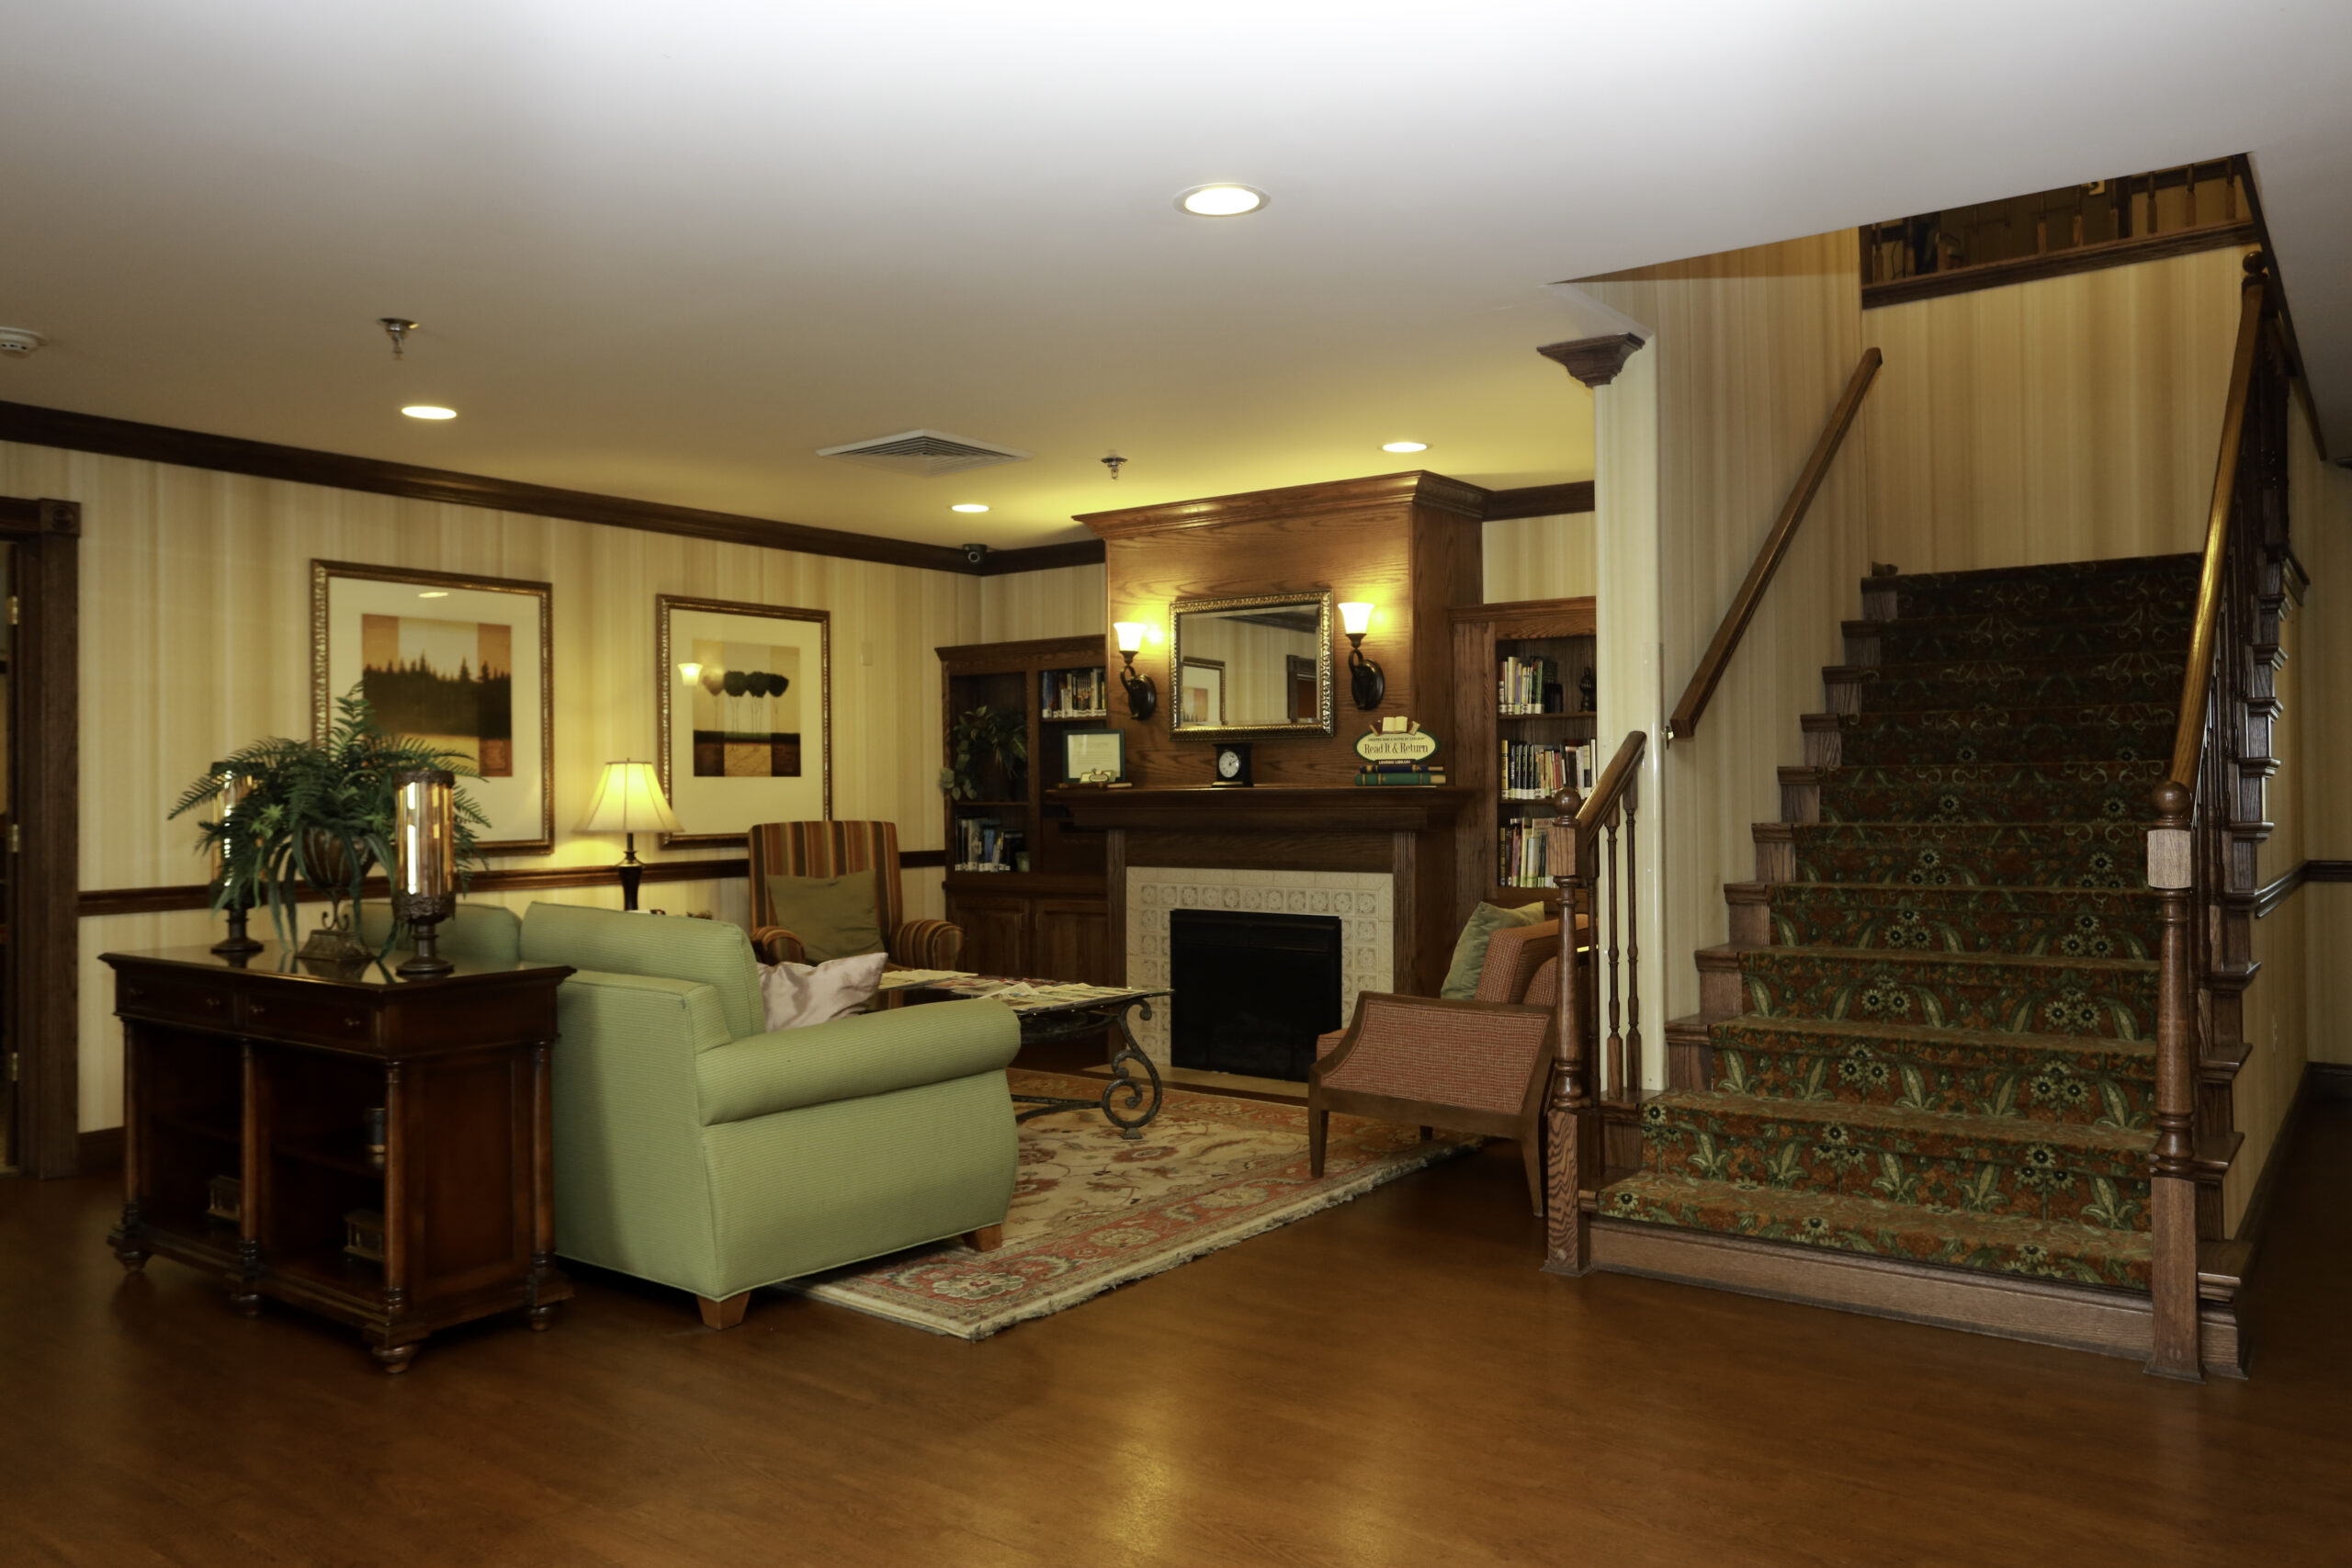 country-inn-and-suites-lobby-marion-illinois